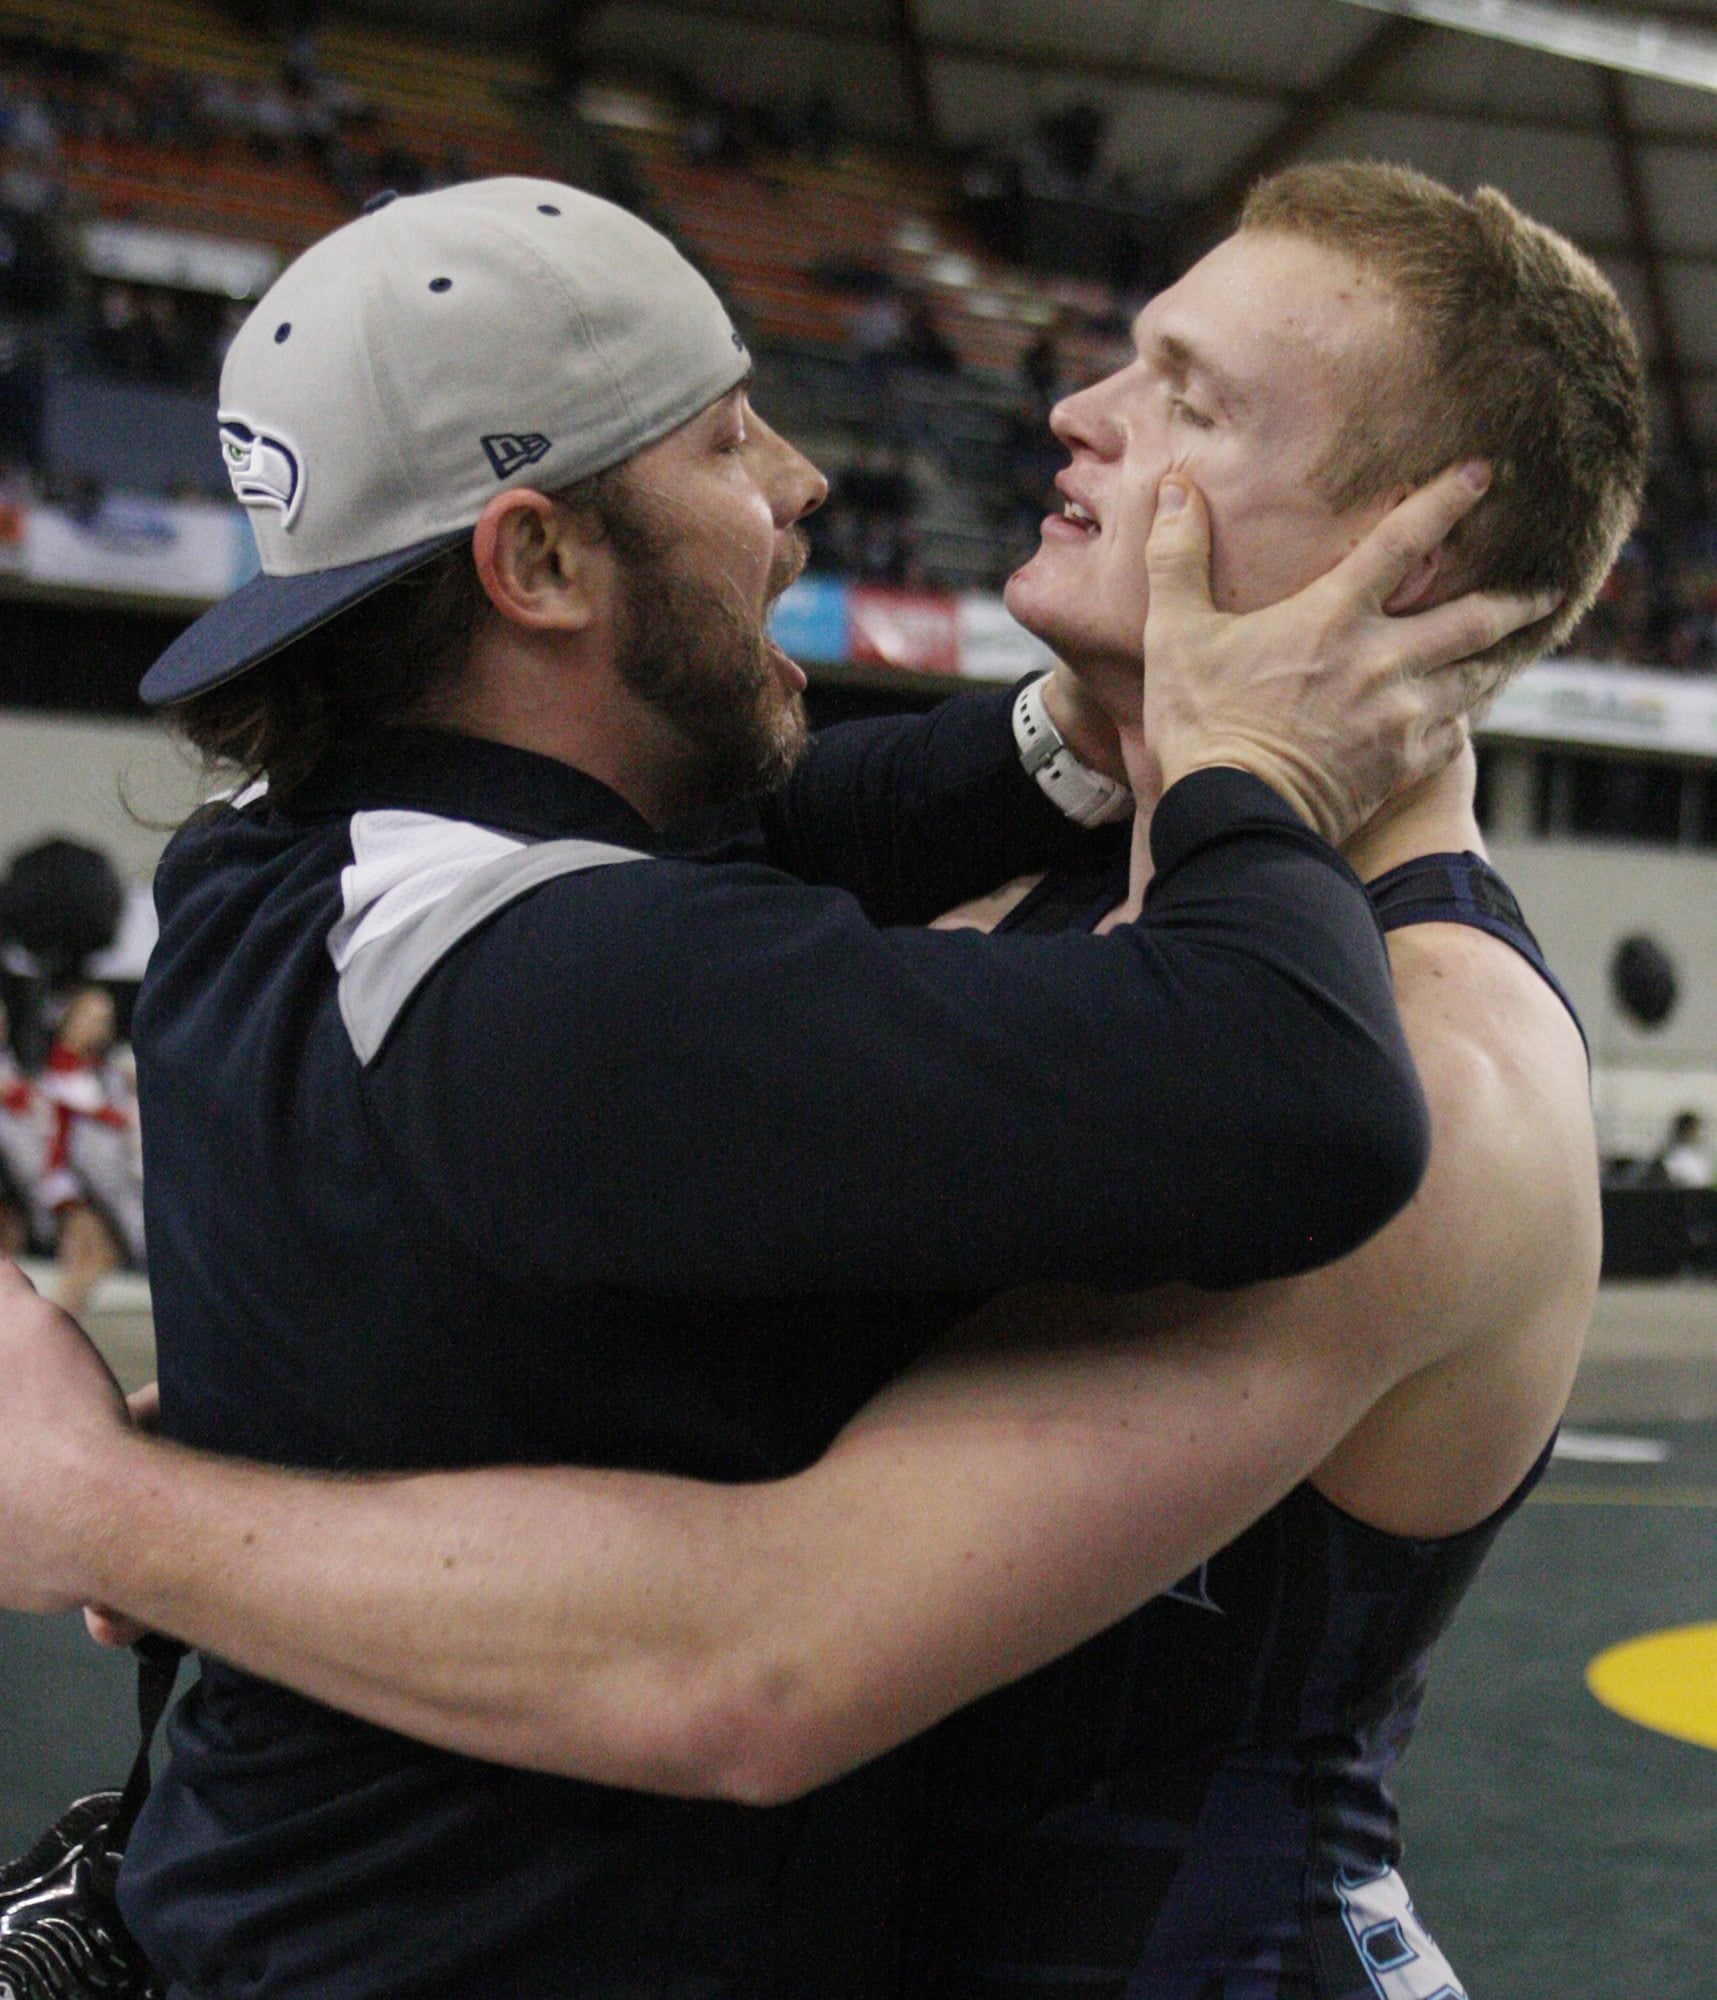 Hockinson assistant coach Rich Day celebrates with Cameron Loos after he pinned Cheney's Michael Ferguson to take the gold medal in the 220 match on Saturday, February 19, 2016 at the Mat Classic XXVIII Championship matches held in the Tacoma Dome.